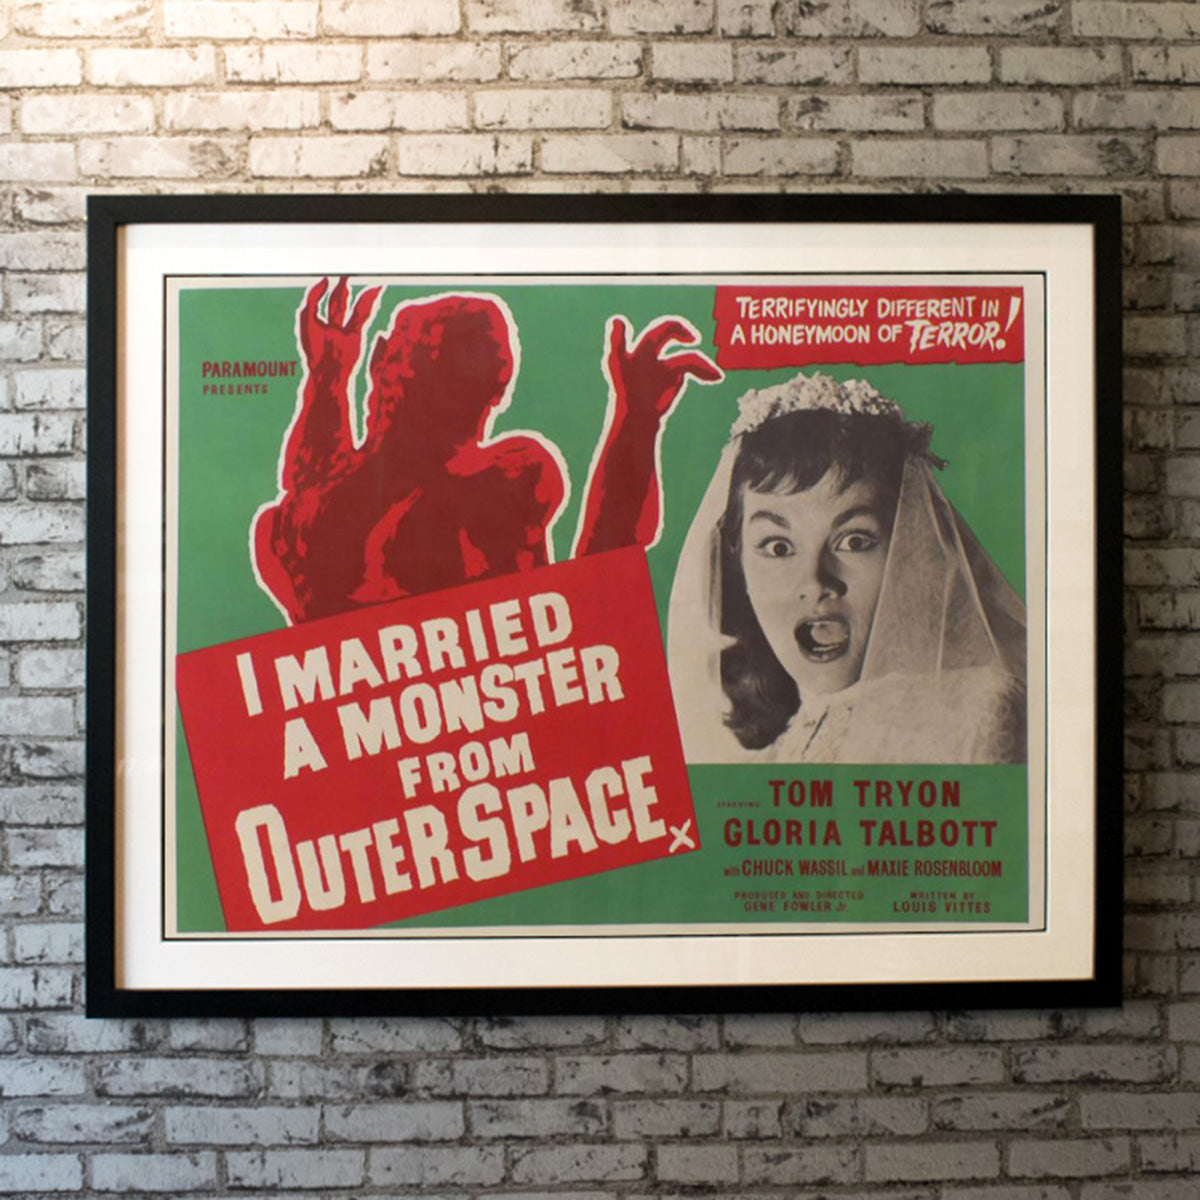 Original Movie Poster of I Married A Monster From Outer Space (1960R)